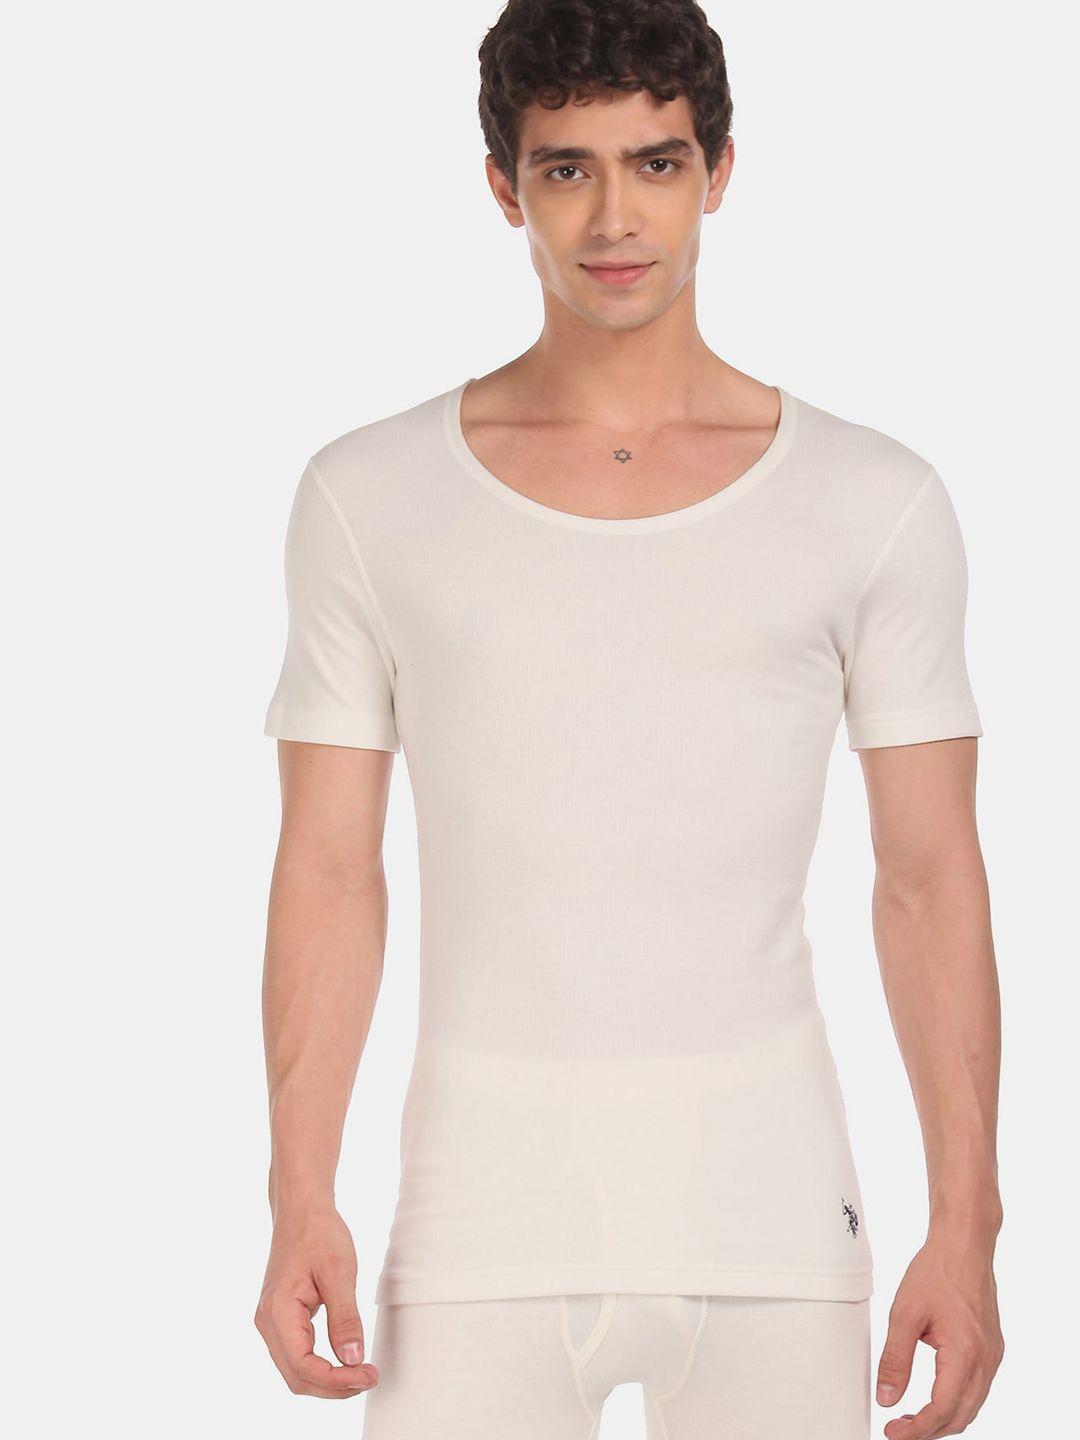 u-s-polo-assn-men-white-ribbed-cotton-knitted-thermal-t-shirt